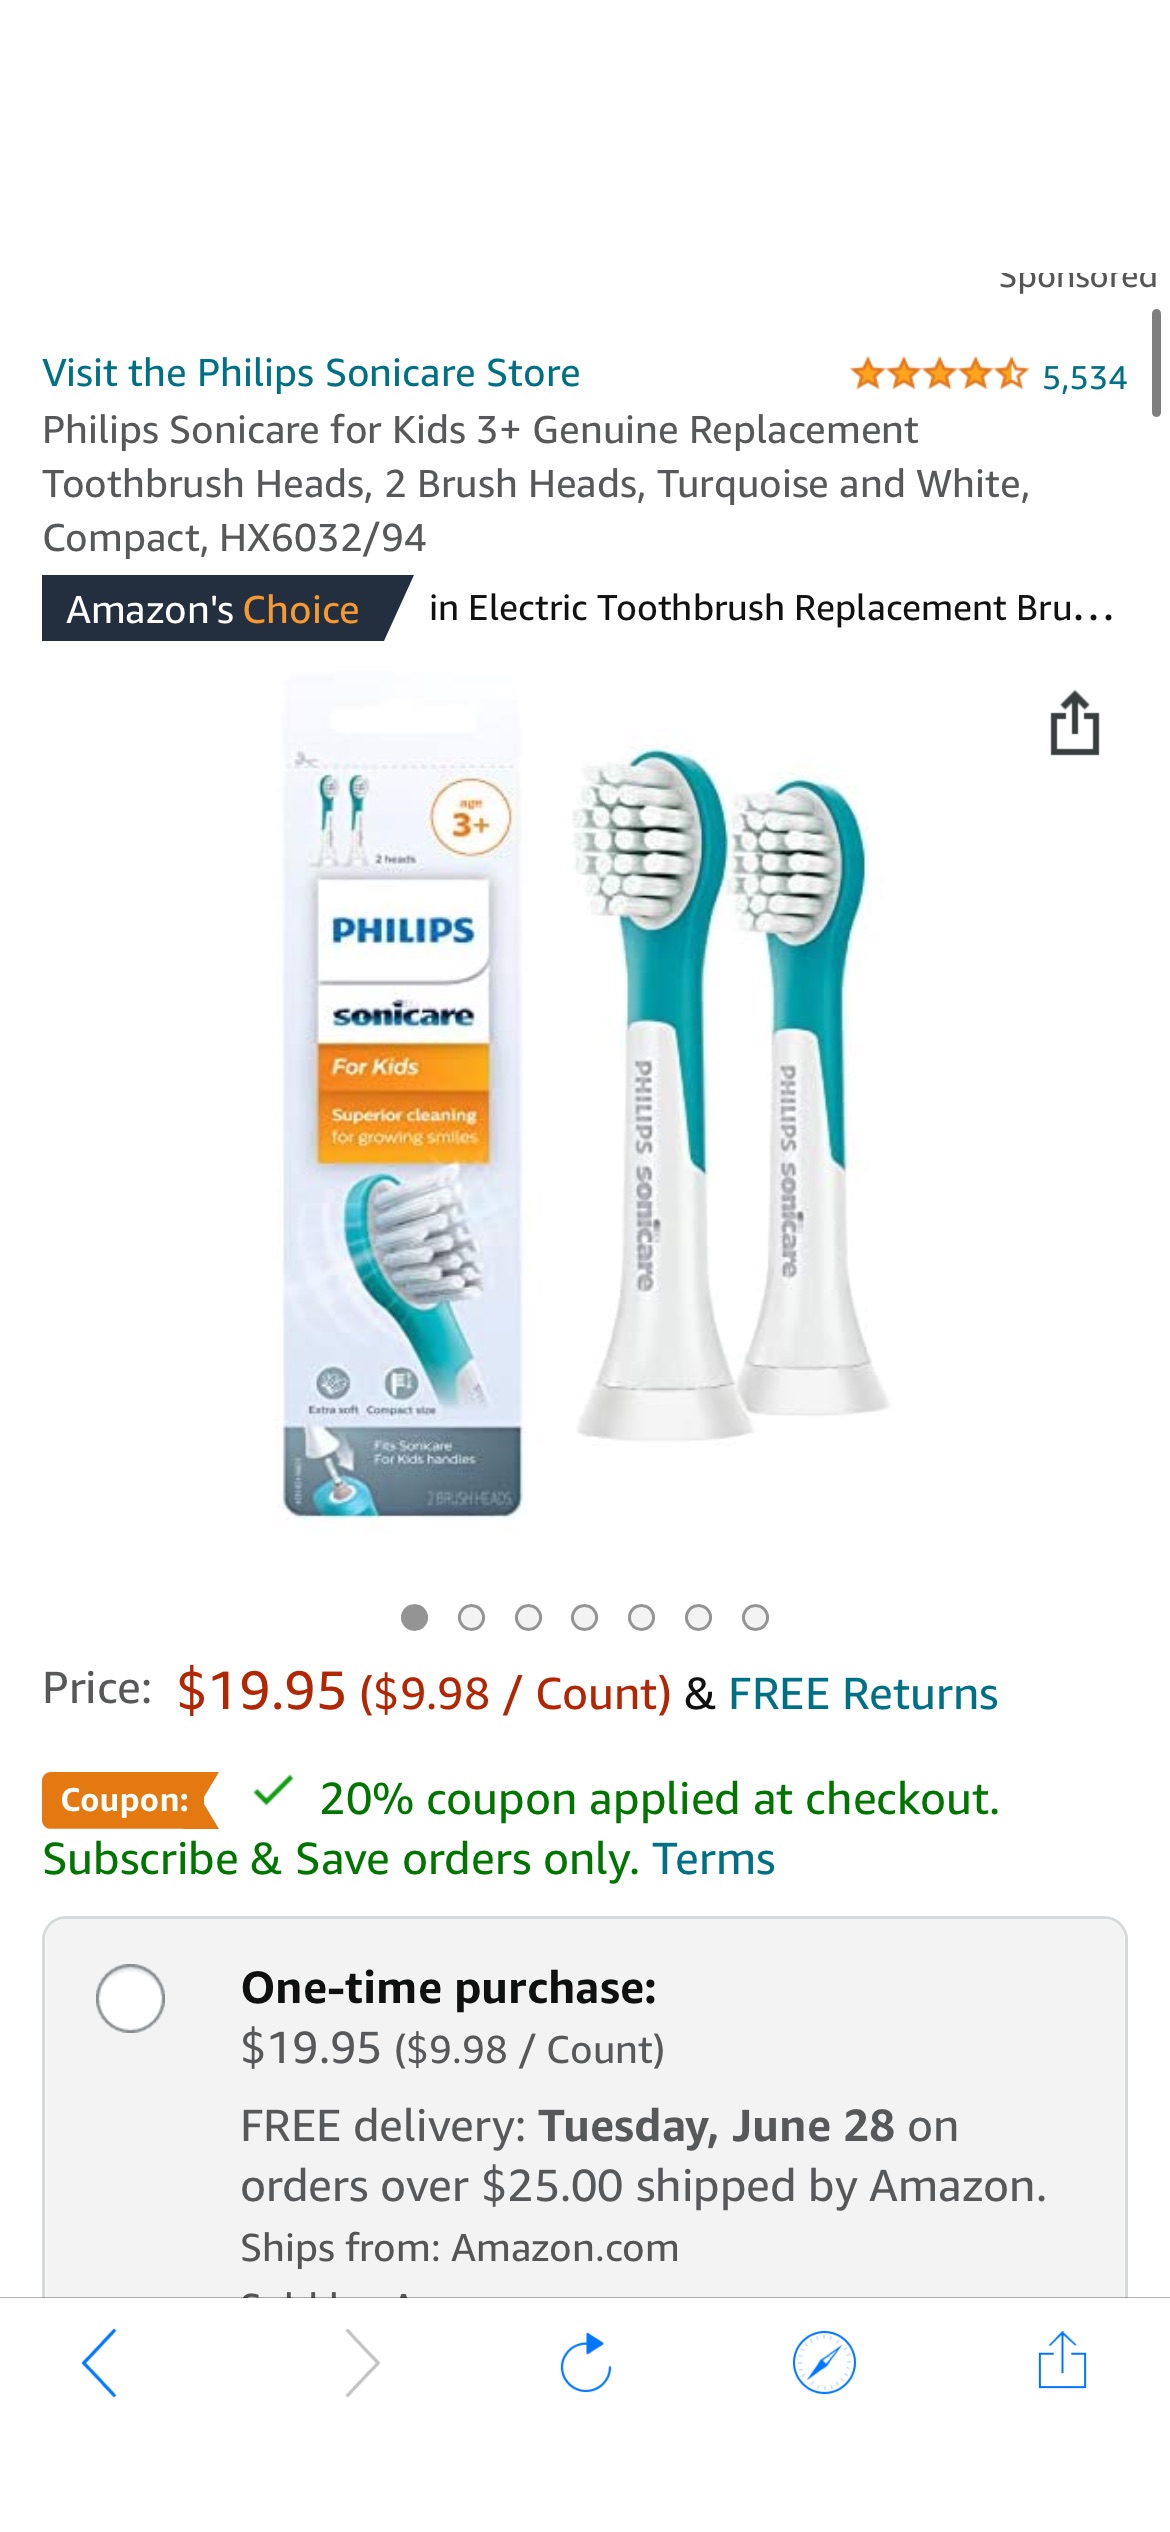 Amazon.com : Philips Sonicare for Kids 3+ Genuine Replacement Toothbrush Heads, 2 Brush Heads, Turquoise and White, Compact, HX6032/94 : Health & Household 牙刷头20%off